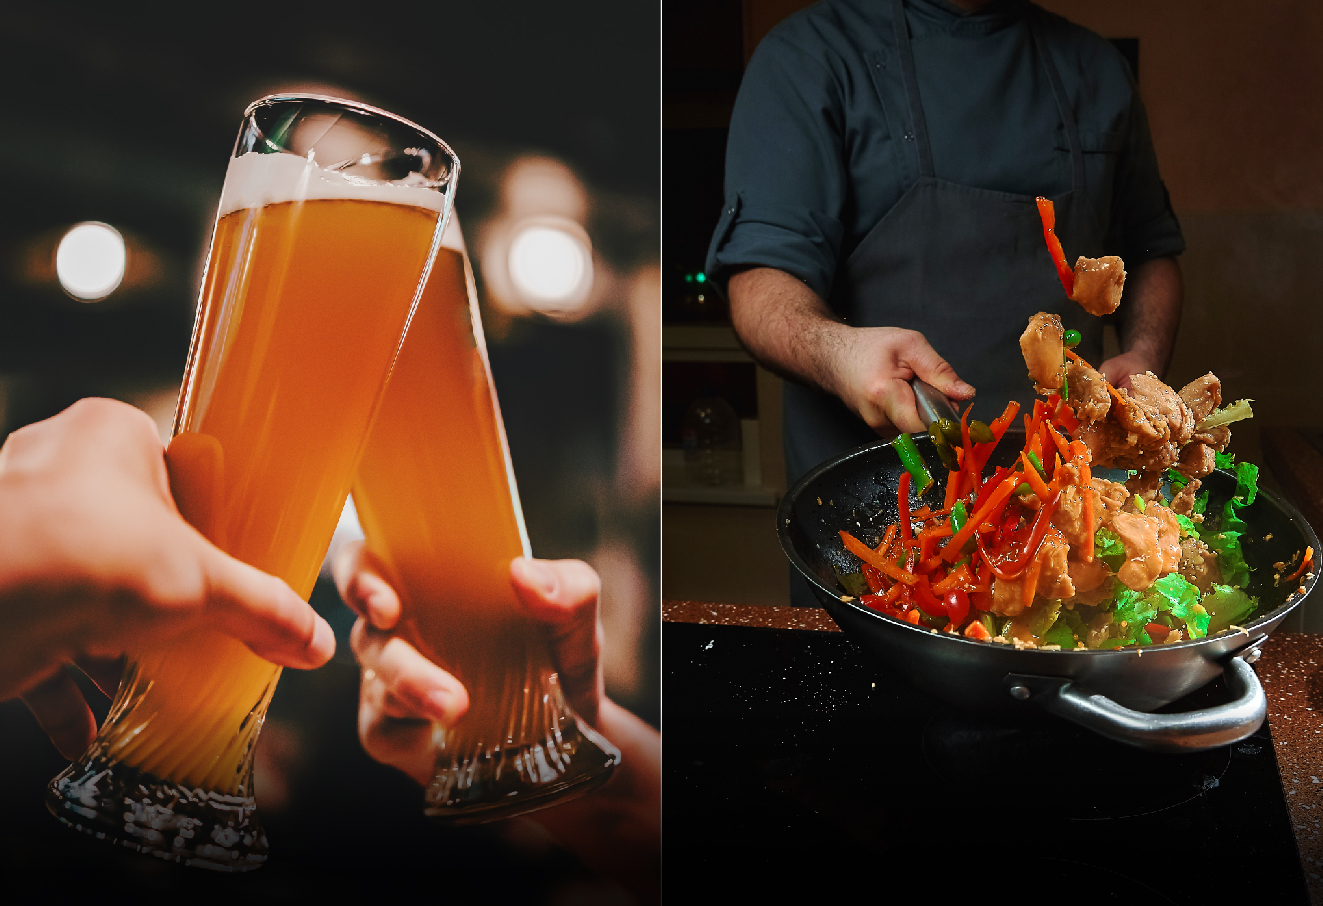 There is two different images fit into one photo. On the left, it's a close-up shot of two glasses of beer clinking together. On the right, it's a bottom half shot of a chef cooking a dish.